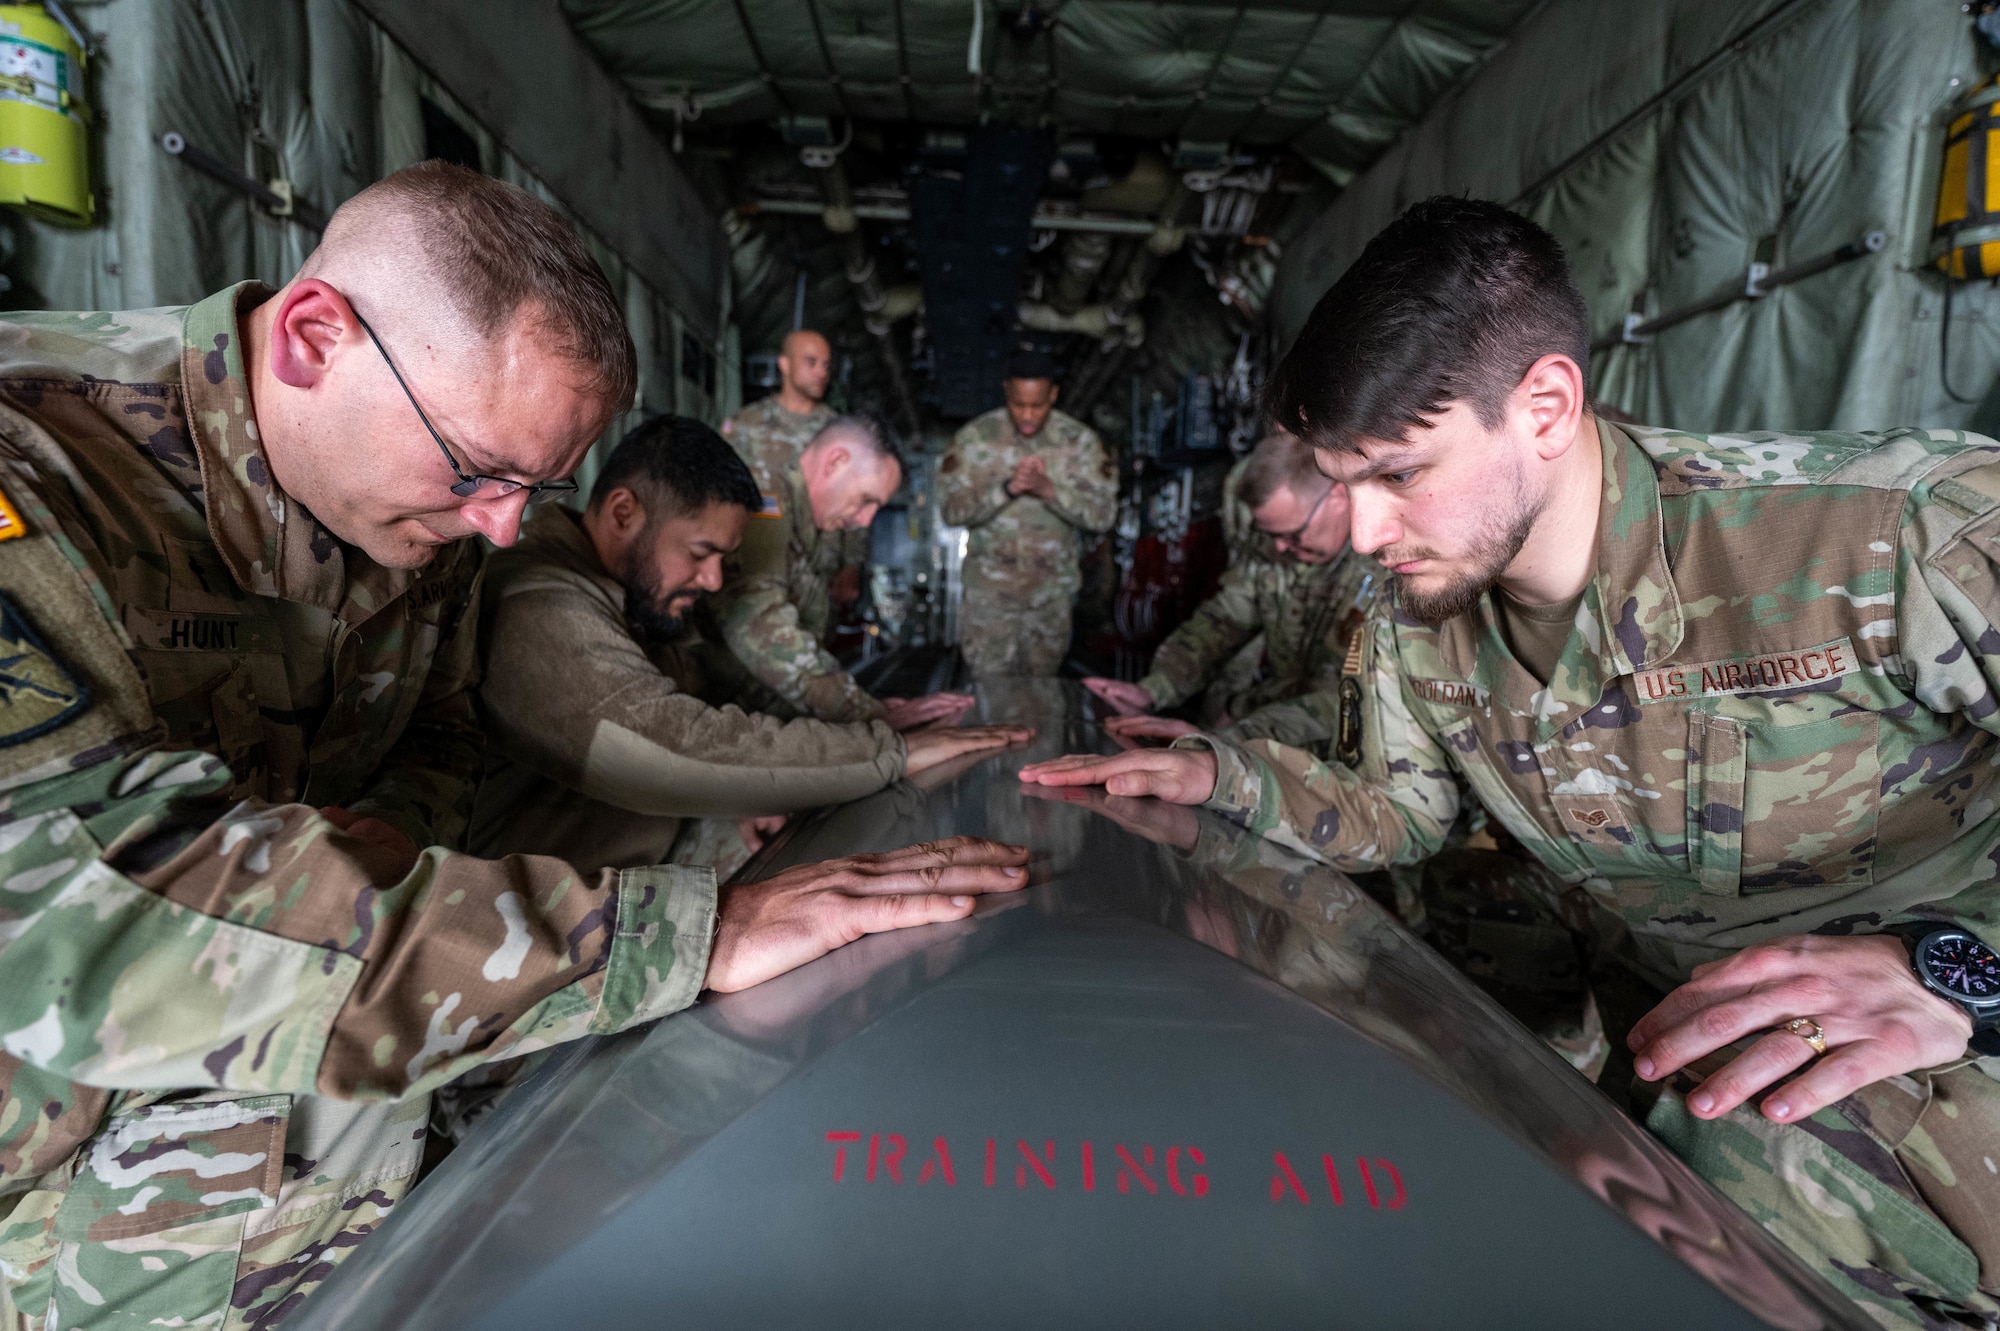 Religious support military members rest their hand on a training casket to say goodbye while a chaplain prays during a simulated ramp ceremony